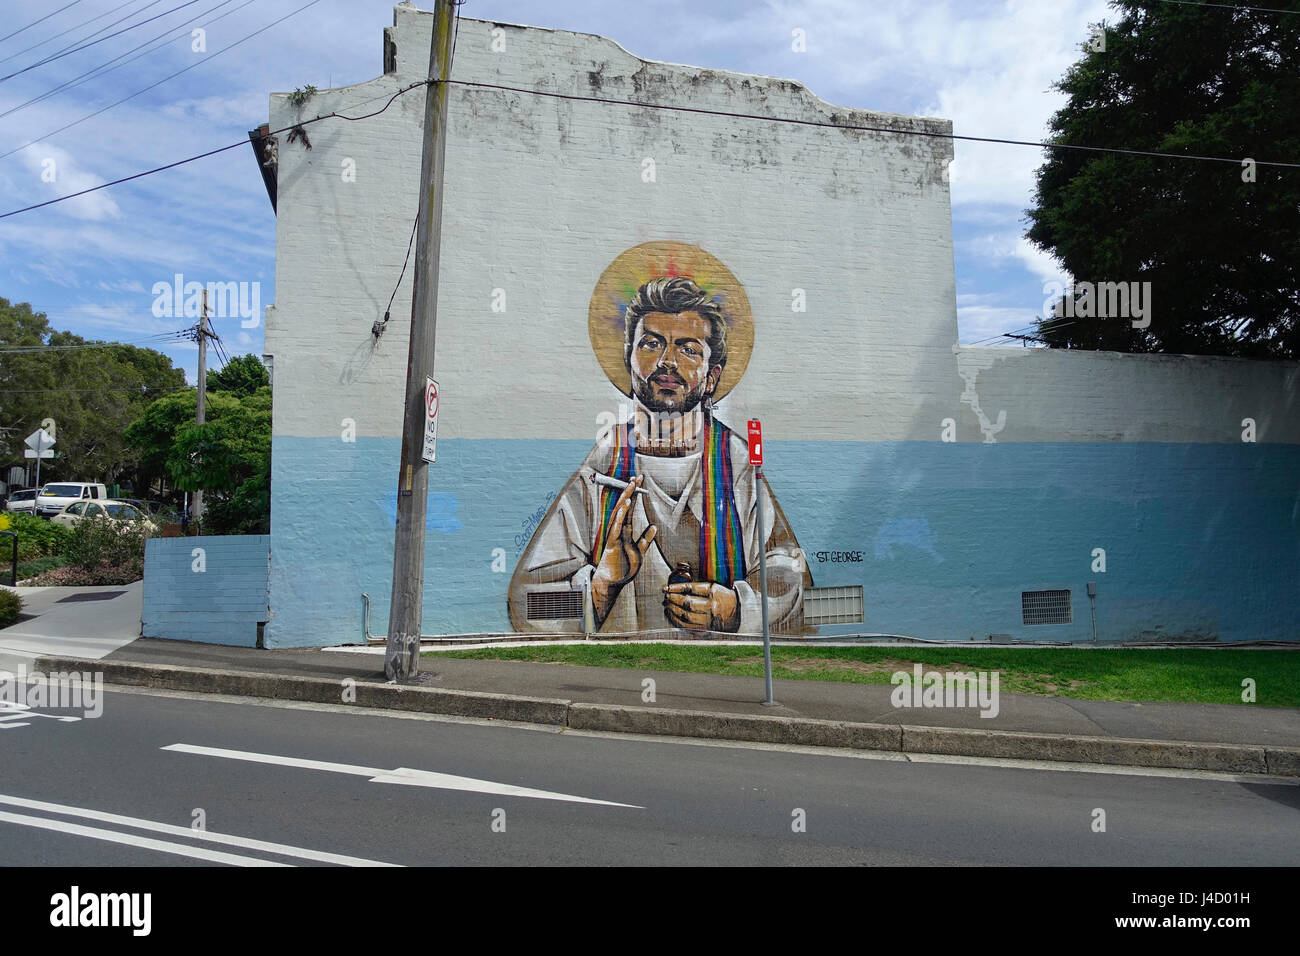 A mural painted in the inner-city suburb of Erskineville, Sydney, NSW, Australia in 2017 depicting the international singing star George Michael Stock Photo